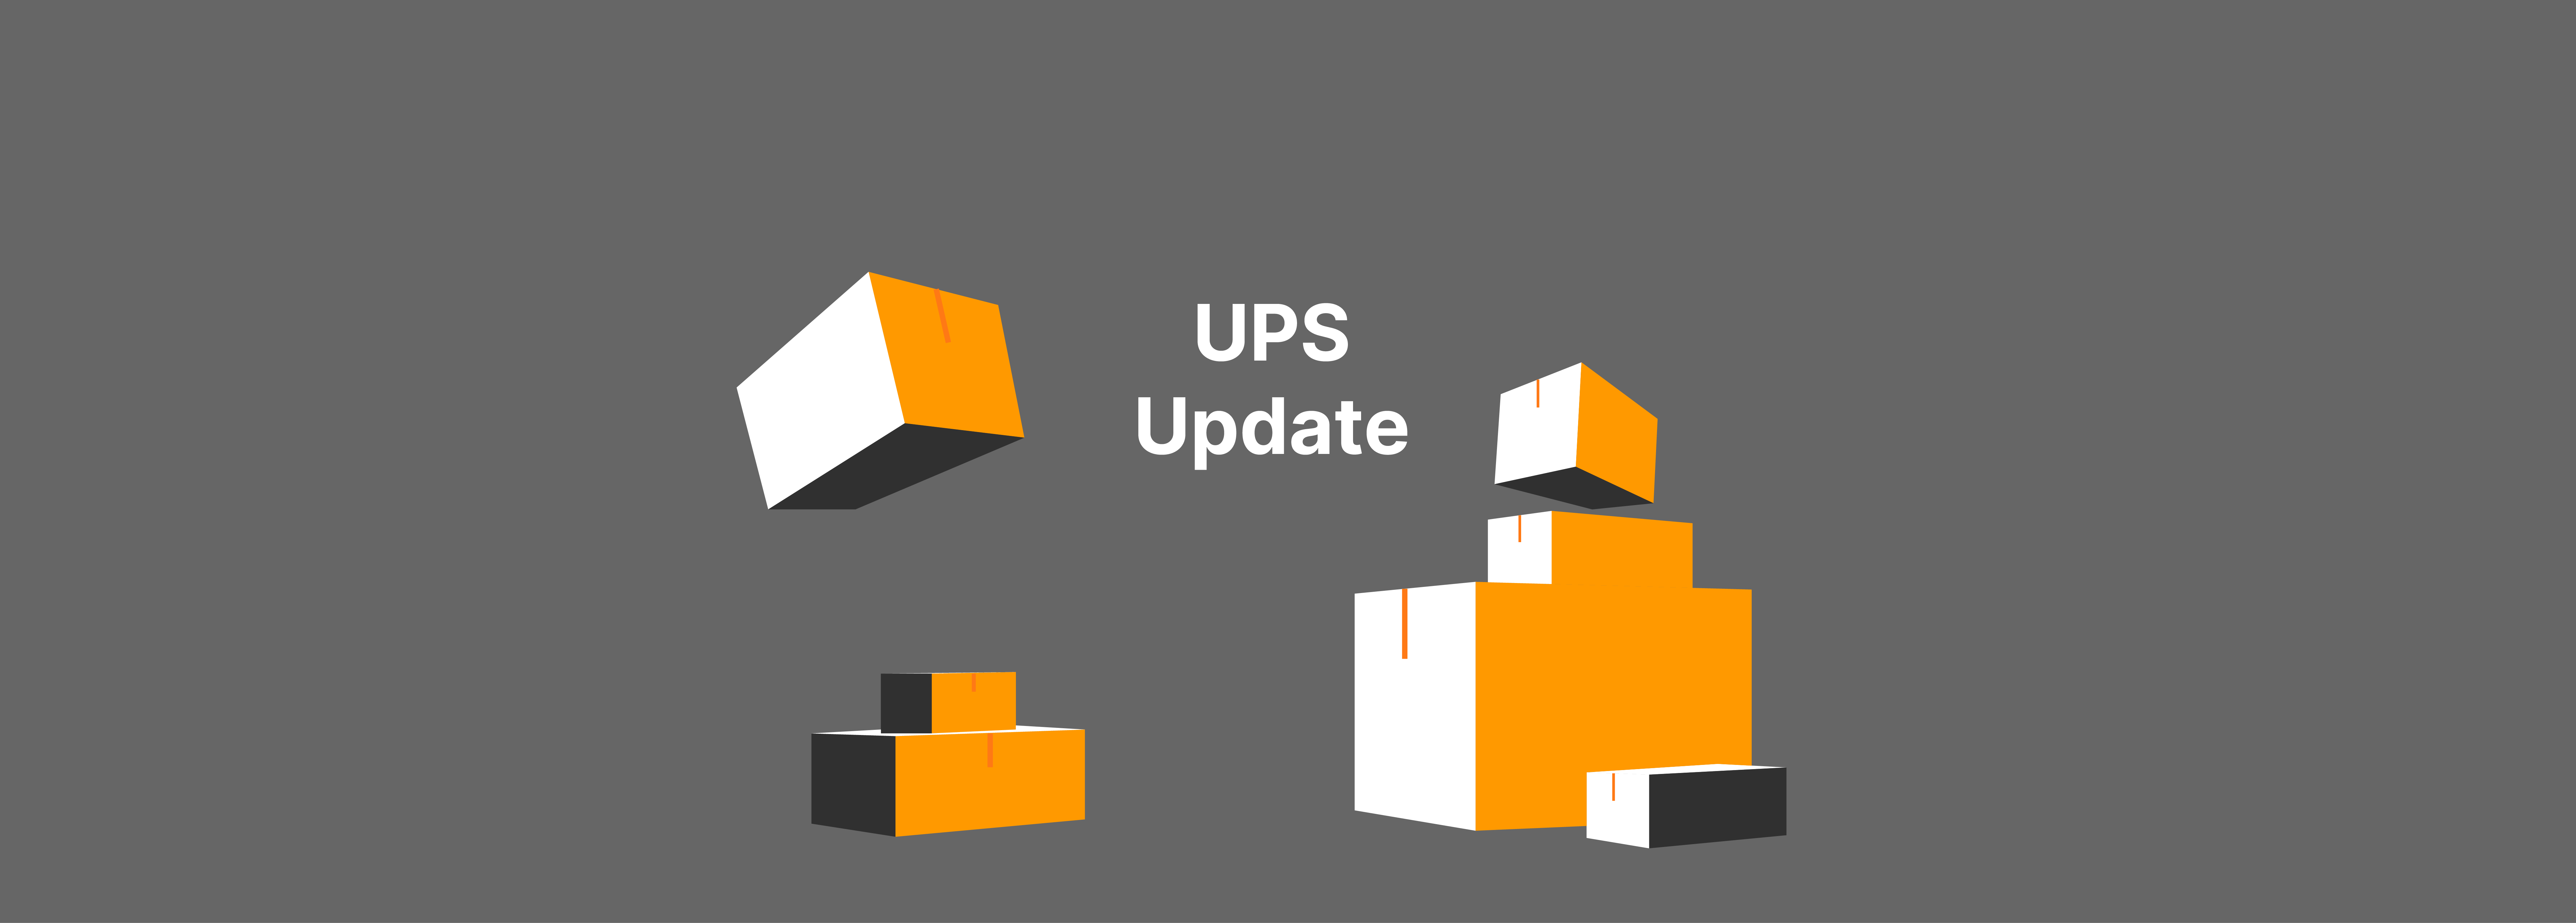 UPS Update: SurePost Rates Are Going Up